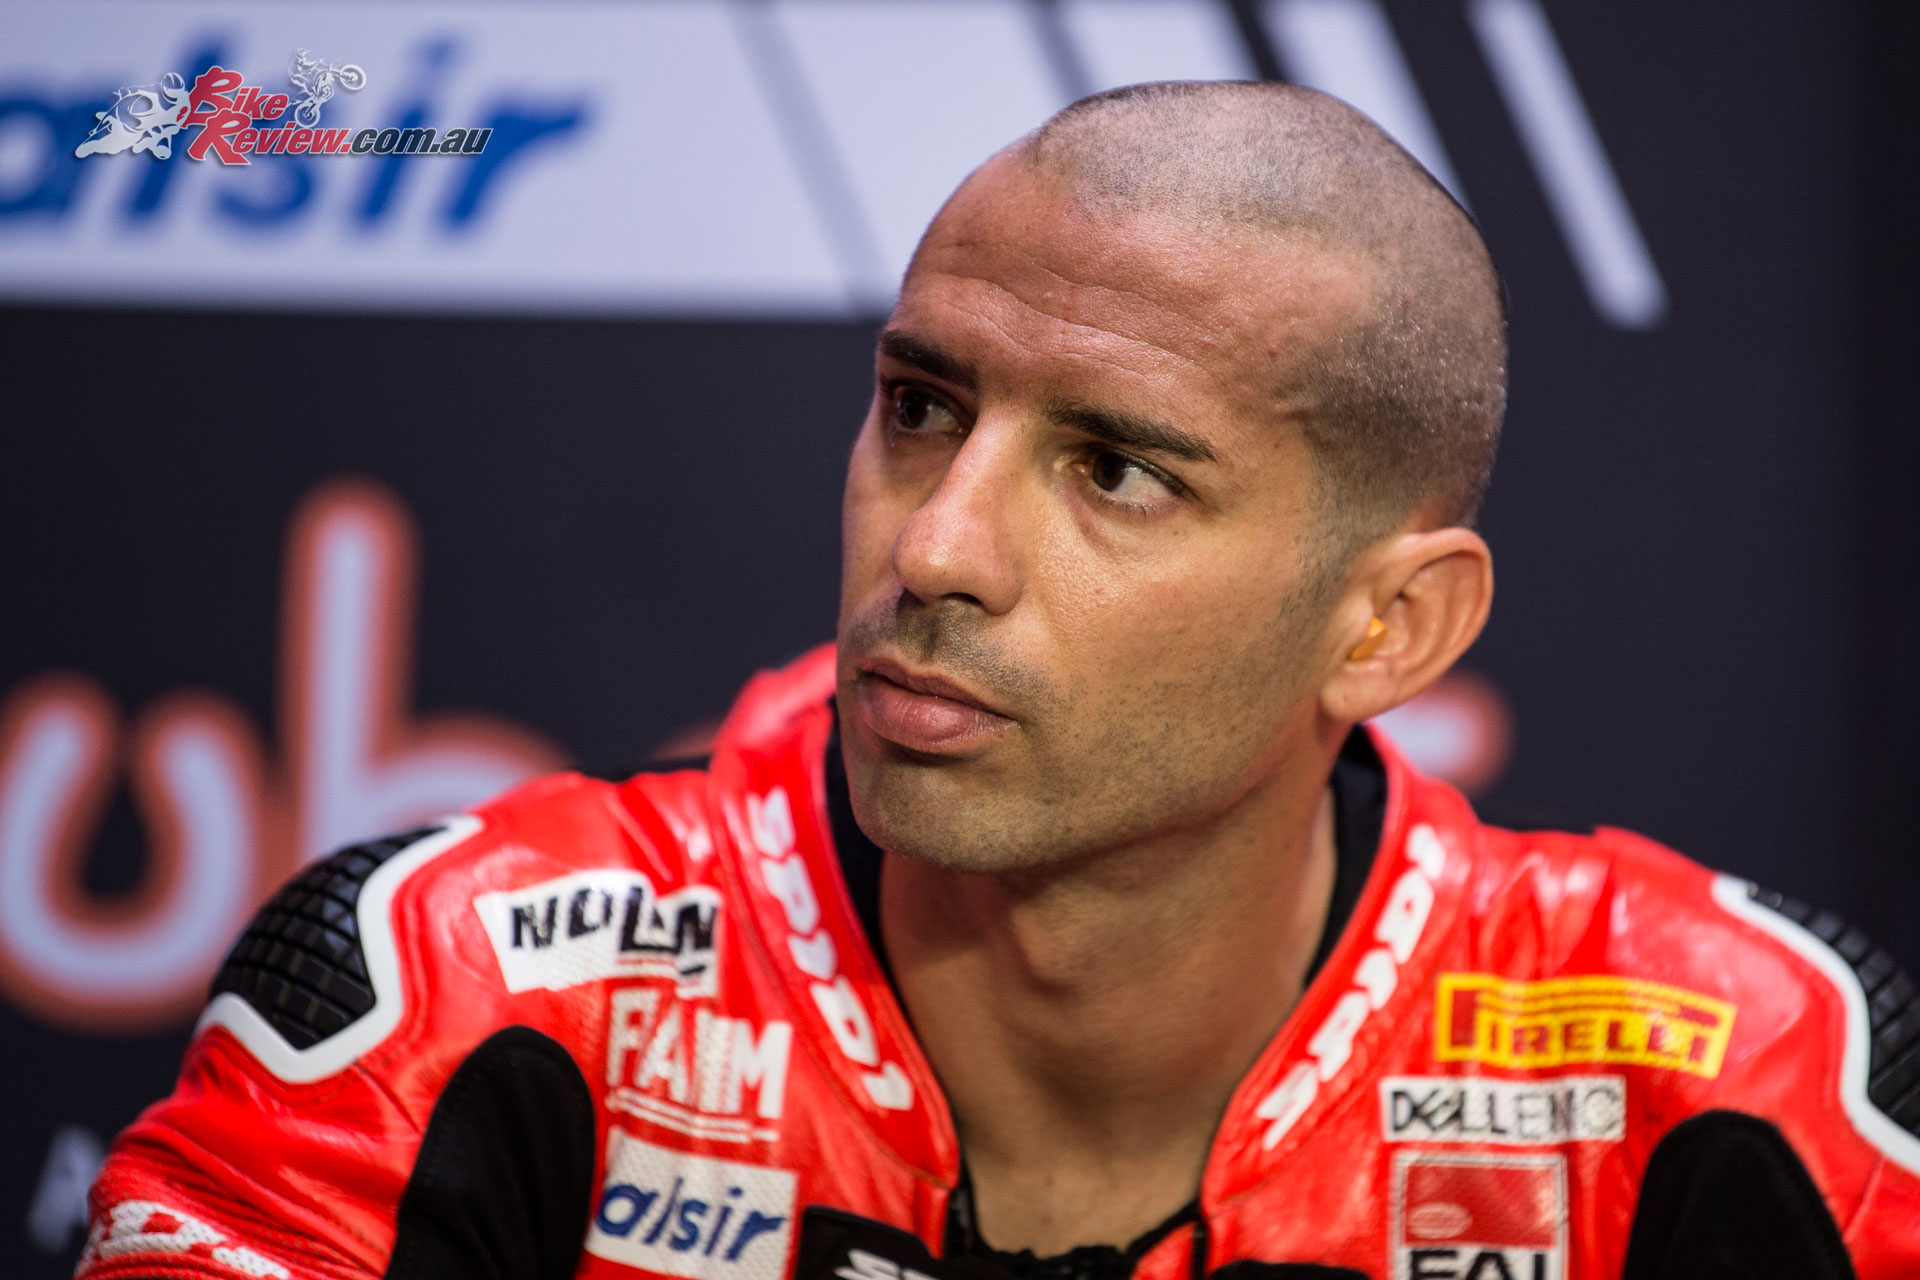 Marco Melandri moves to GRT Yamaha in 2019 - Image by Geebee Images